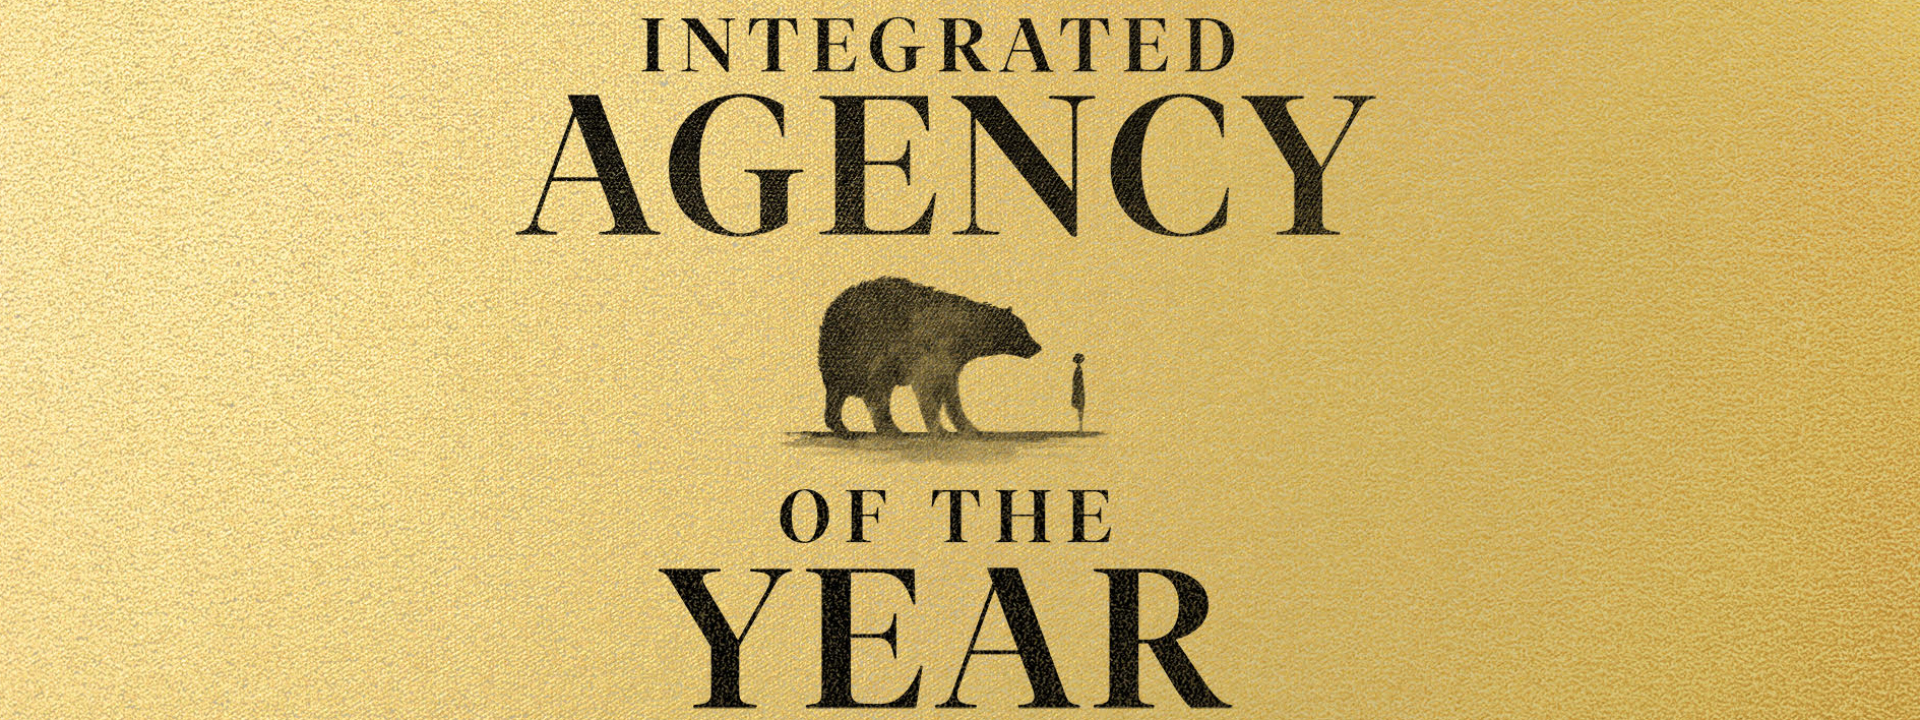 Gold background with VCCP girl and bear logo. text reads: campaign integrated agency of the year